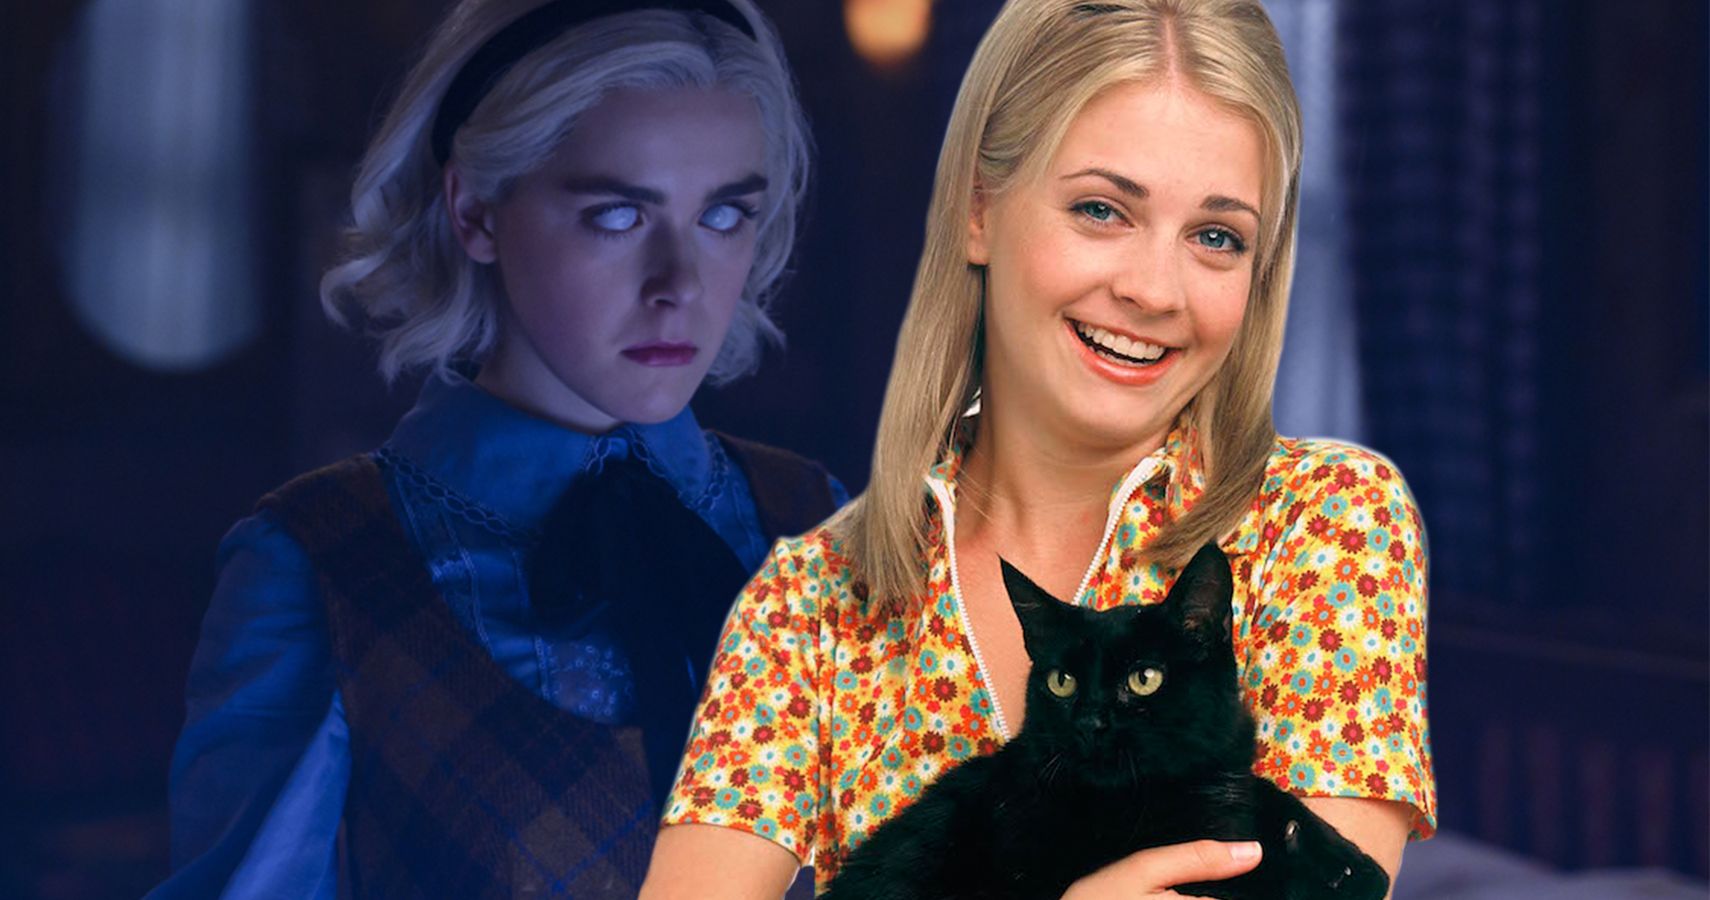 5 Major Differences Between Sabrina the Teenage Witch & Chilling Adventures Of Sabrina (& 5 Similarities)